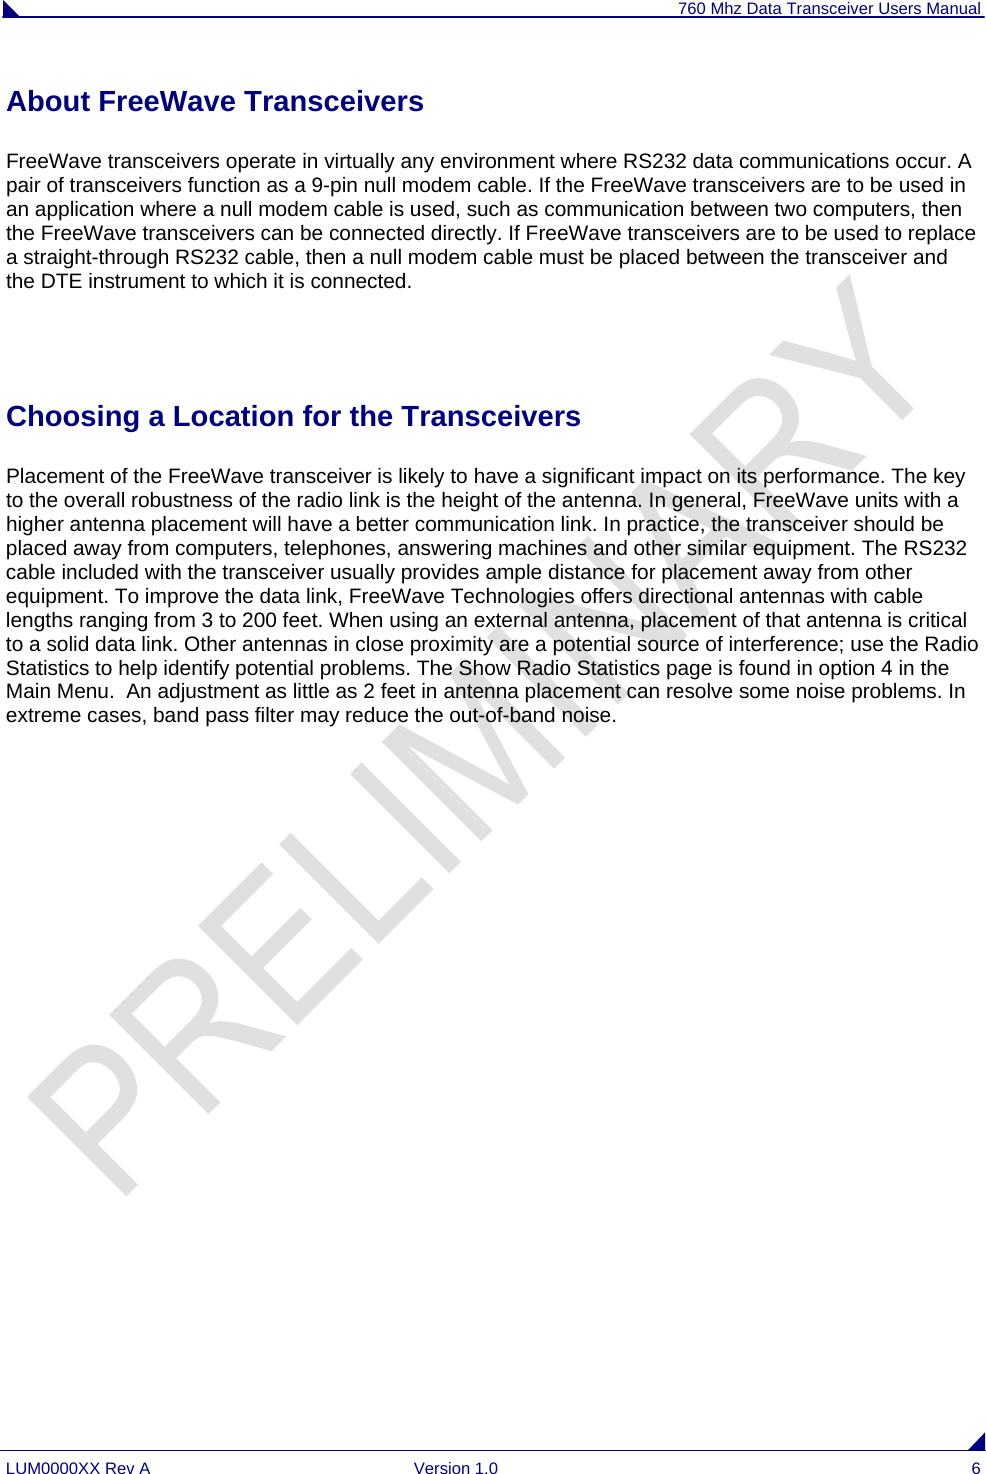 760 Mhz Data Transceiver Users Manual LUM0000XX Rev A  Version 1.0  6 About FreeWave Transceivers FreeWave transceivers operate in virtually any environment where RS232 data communications occur. A pair of transceivers function as a 9-pin null modem cable. If the FreeWave transceivers are to be used in an application where a null modem cable is used, such as communication between two computers, then the FreeWave transceivers can be connected directly. If FreeWave transceivers are to be used to replace a straight-through RS232 cable, then a null modem cable must be placed between the transceiver and the DTE instrument to which it is connected.  Choosing a Location for the Transceivers Placement of the FreeWave transceiver is likely to have a significant impact on its performance. The key to the overall robustness of the radio link is the height of the antenna. In general, FreeWave units with a higher antenna placement will have a better communication link. In practice, the transceiver should be placed away from computers, telephones, answering machines and other similar equipment. The RS232 cable included with the transceiver usually provides ample distance for placement away from other equipment. To improve the data link, FreeWave Technologies offers directional antennas with cable lengths ranging from 3 to 200 feet. When using an external antenna, placement of that antenna is critical to a solid data link. Other antennas in close proximity are a potential source of interference; use the Radio Statistics to help identify potential problems. The Show Radio Statistics page is found in option 4 in the Main Menu.  An adjustment as little as 2 feet in antenna placement can resolve some noise problems. In extreme cases, band pass filter may reduce the out-of-band noise.   